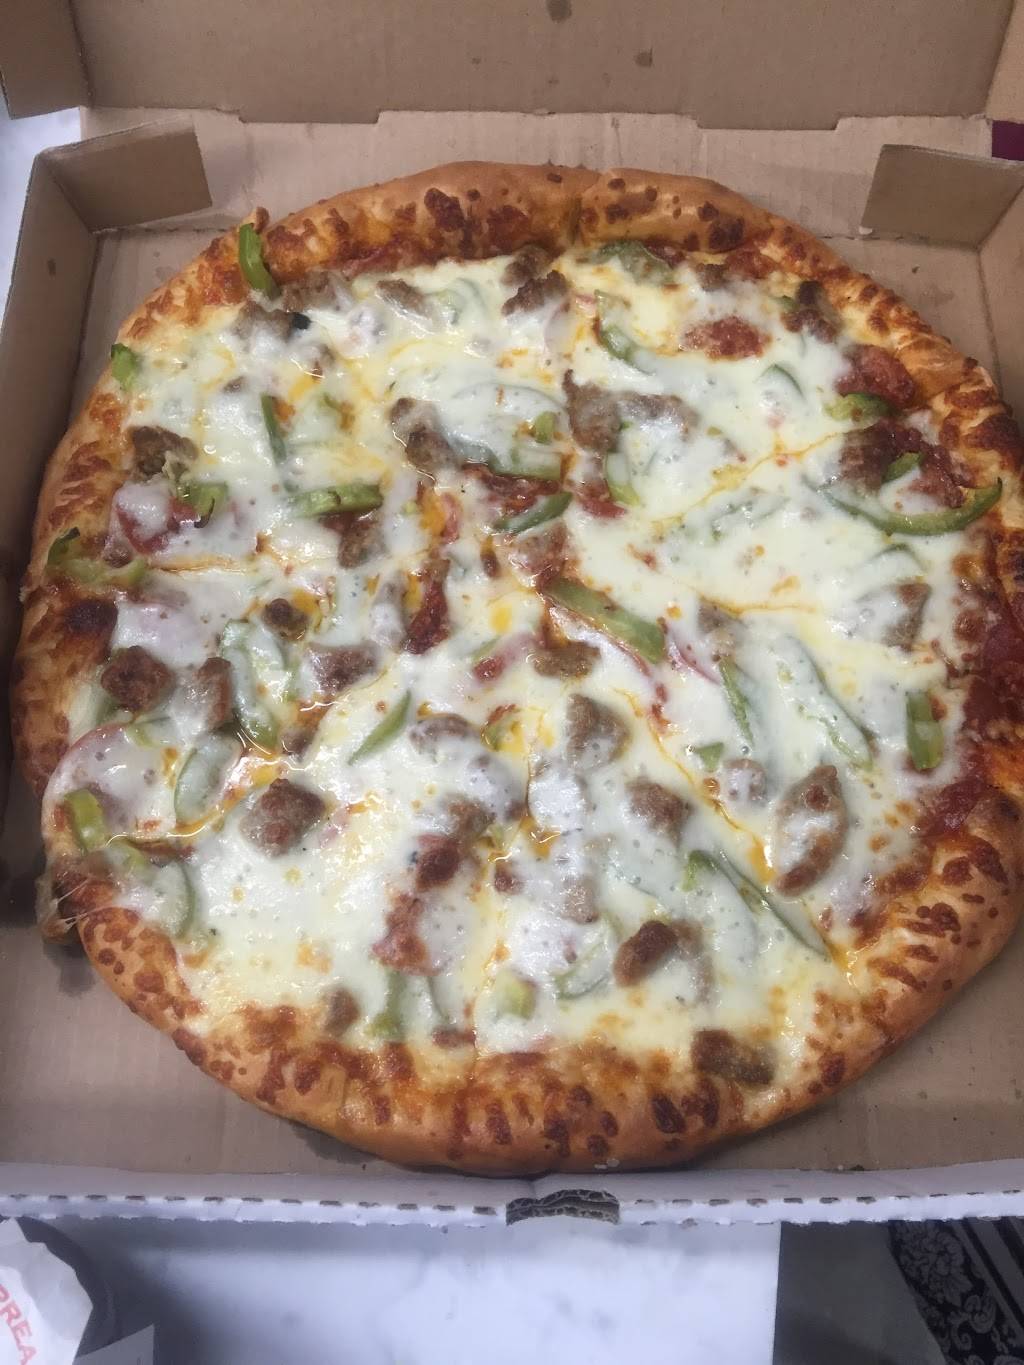 RIZZA PIZZA | meal delivery | 1031 W Foothill Blvd, Upland, CA 91786, USA | 9099469991 OR +1 909-946-9991